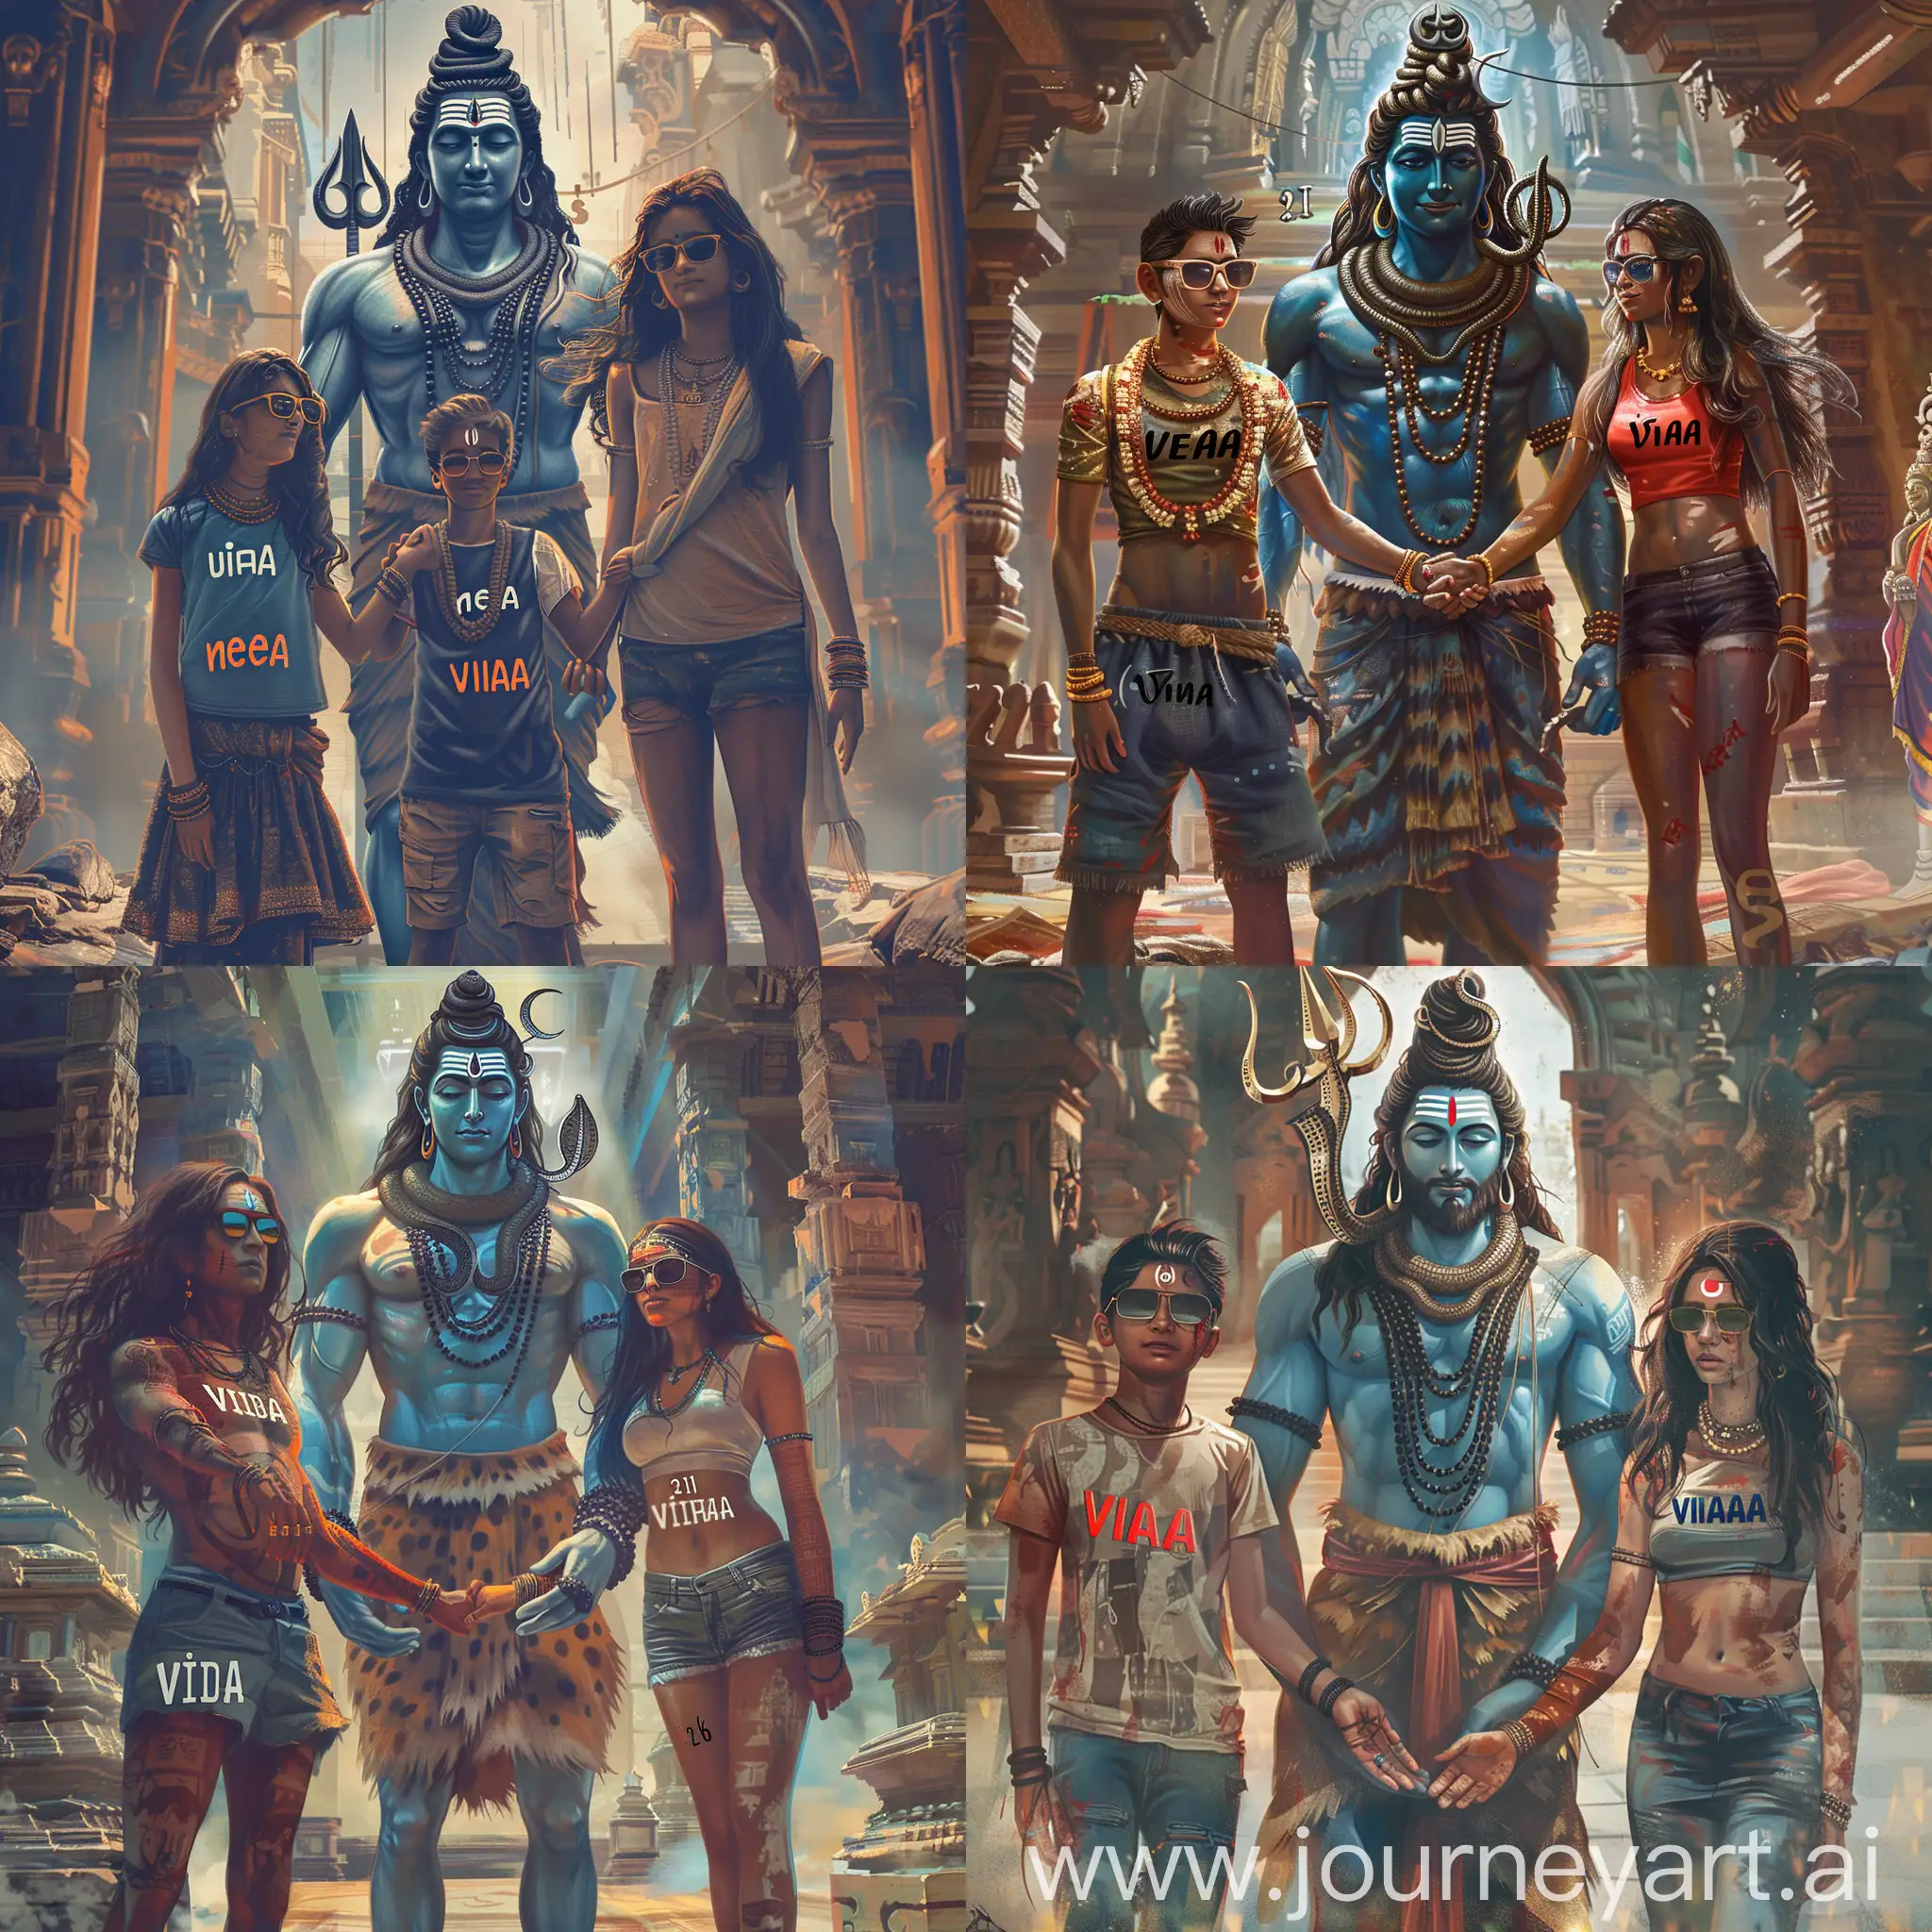 create a high quality realistic image, in which lord shiva is holding hands of a 31 year old boy WITH SUNGLASSES and 26 year old girl, both are wearing casual dress with name of girl 'NEHA' and name of boy 'VIJAY' written boldly on their top, both are watching towards lord shiva with little smile, all three are standing with lord shiva in middle , the background is of interior of a temple and the environment is gorgeous.